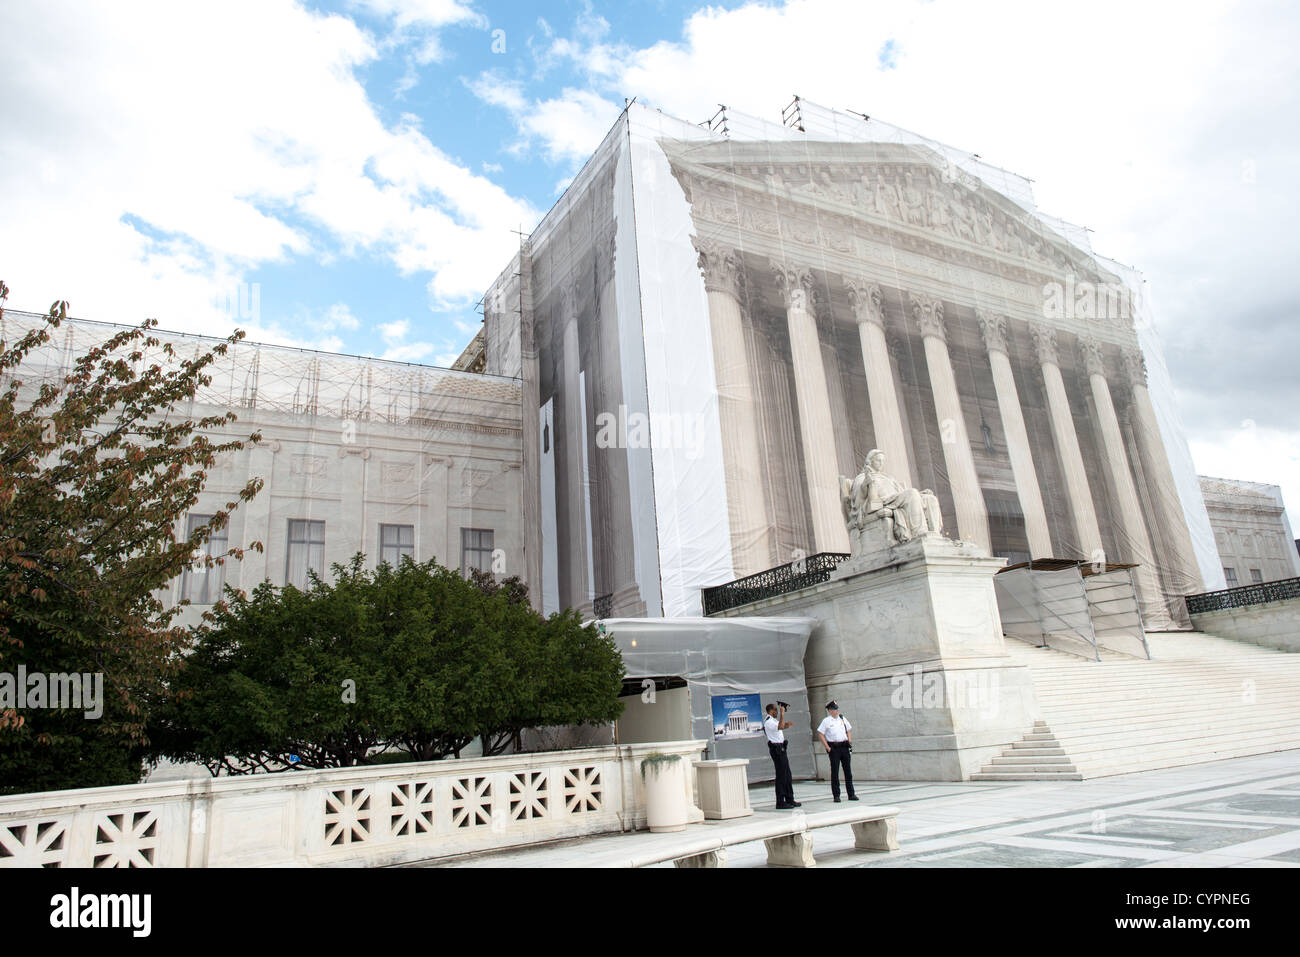 WASHINGTON DC, USA - While the US Supreme Court building is undergoing renovations, it is covered with a light scrim over the scaffolding that shows an image of the building as it was before the repairs and without the scaffolding. Stock Photo